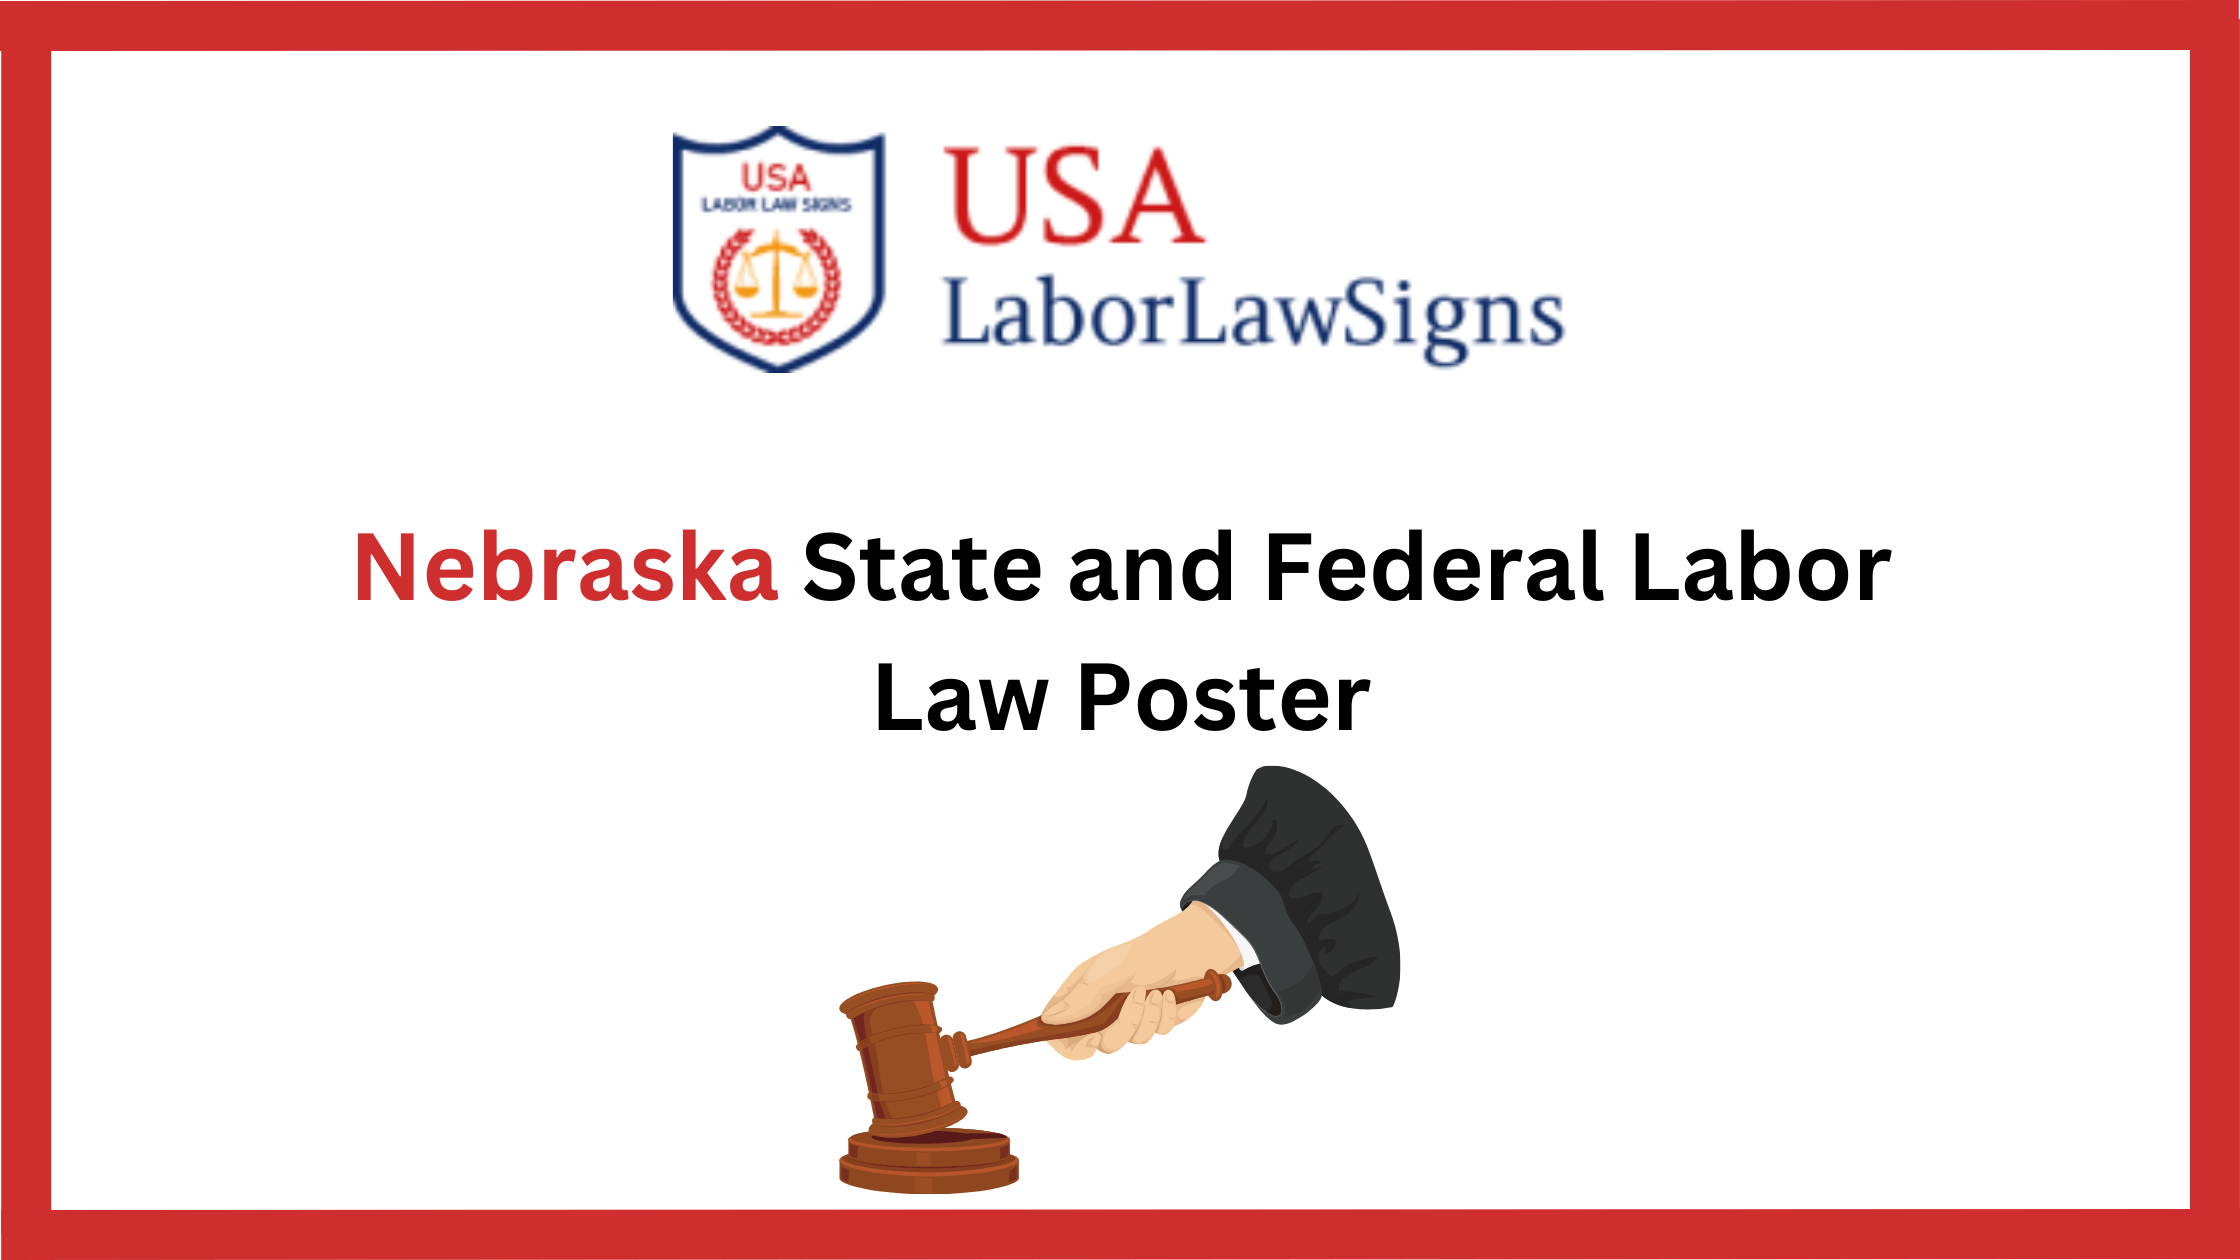 Nebraska State and Federal Labor Law Poster